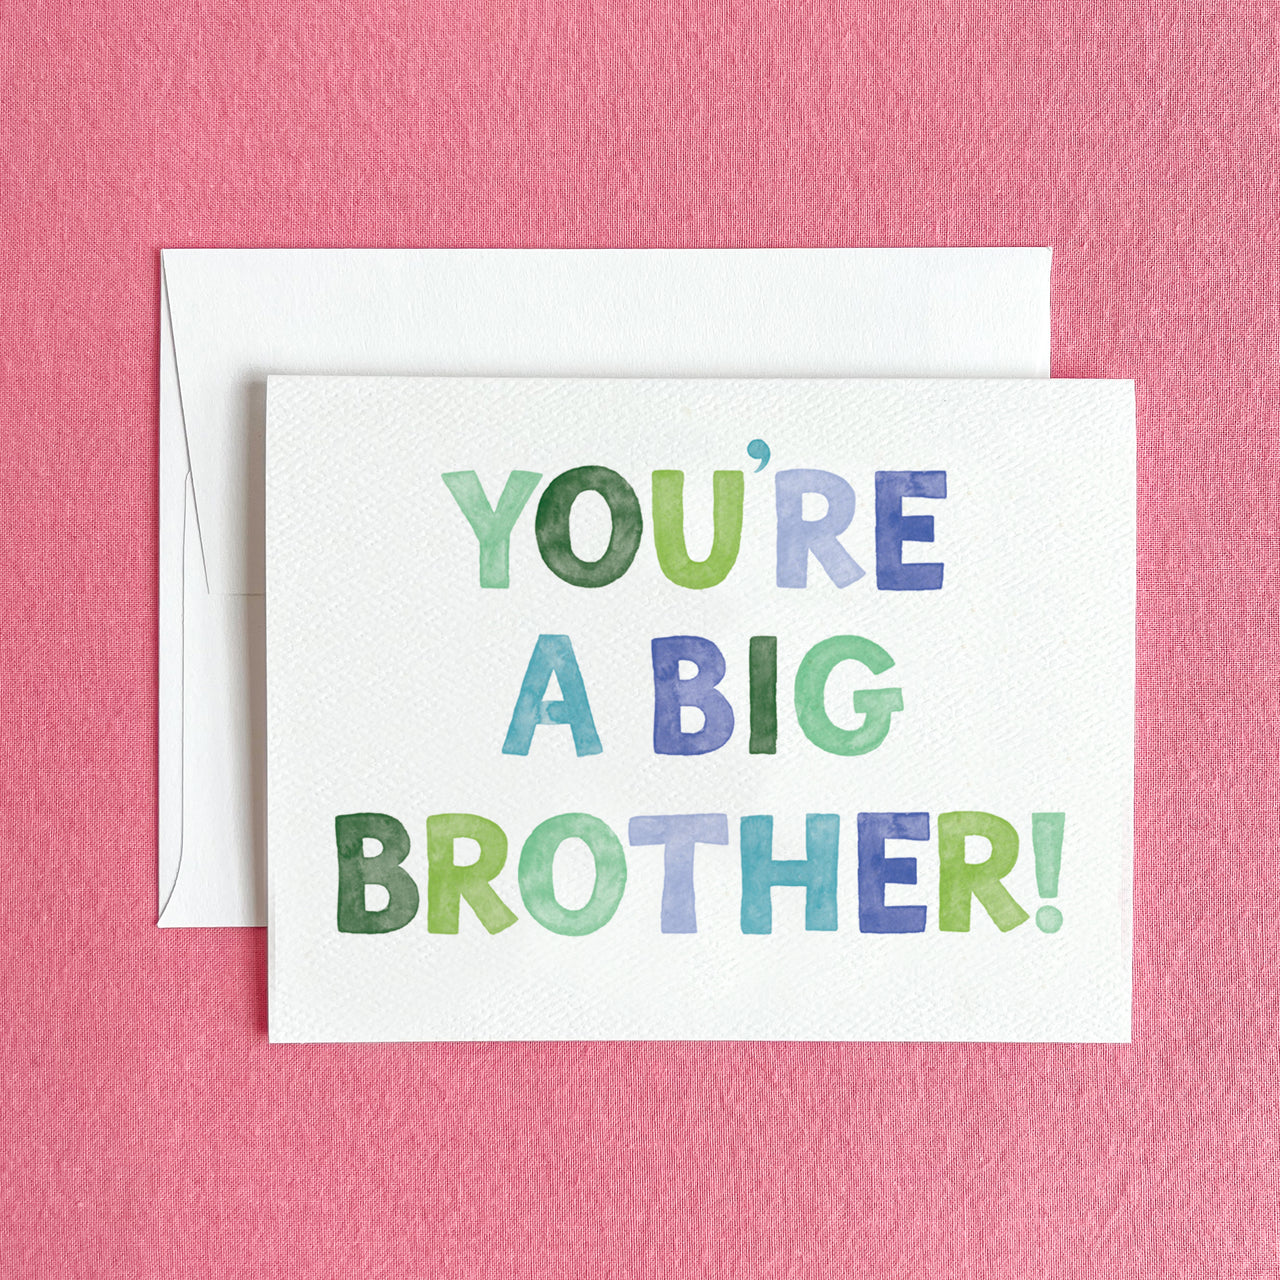 You're a Big Brother Greeting Card by Gert & Co